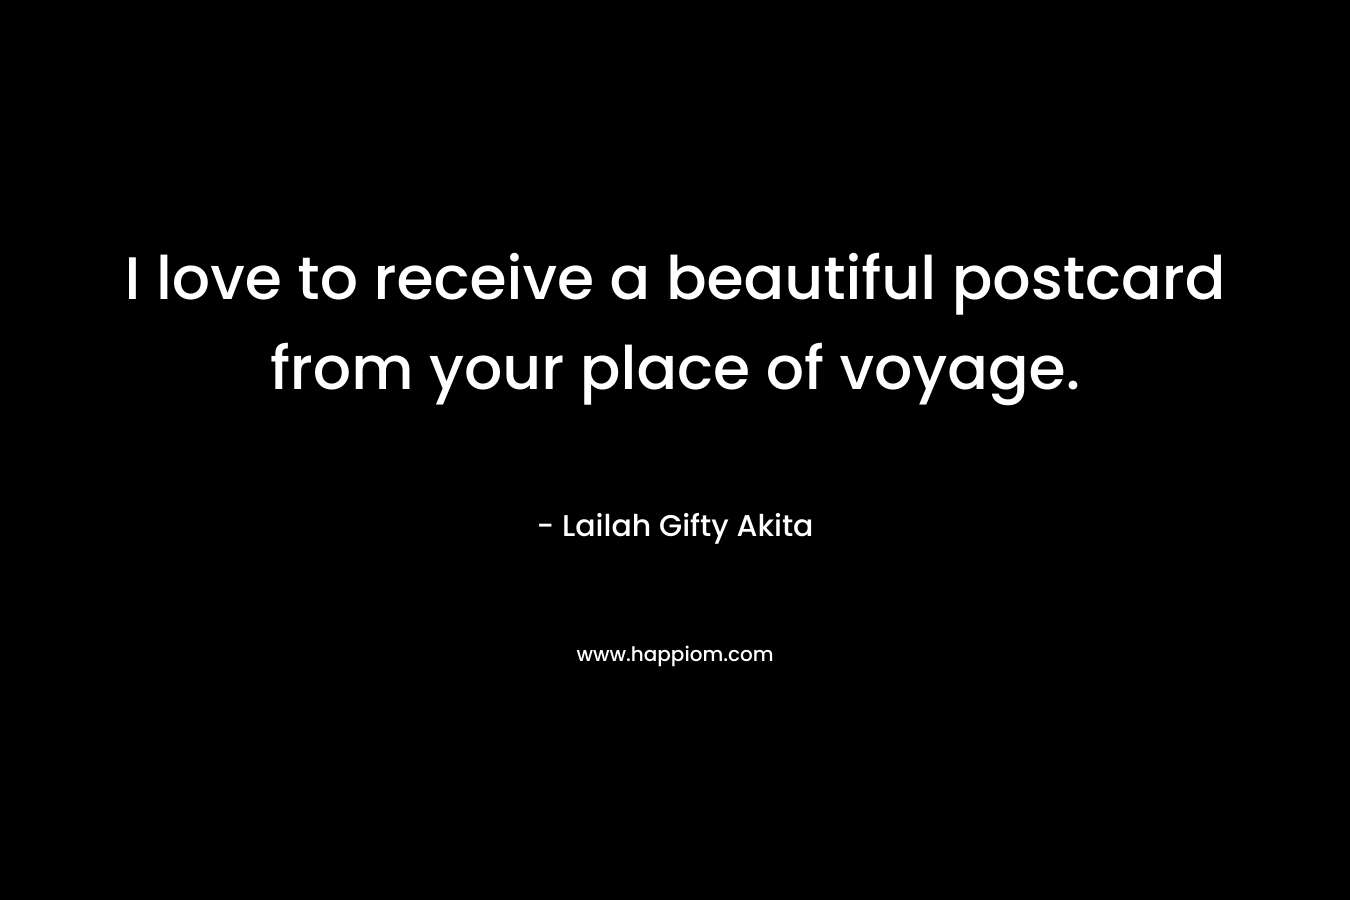 I love to receive a beautiful postcard from your place of voyage.